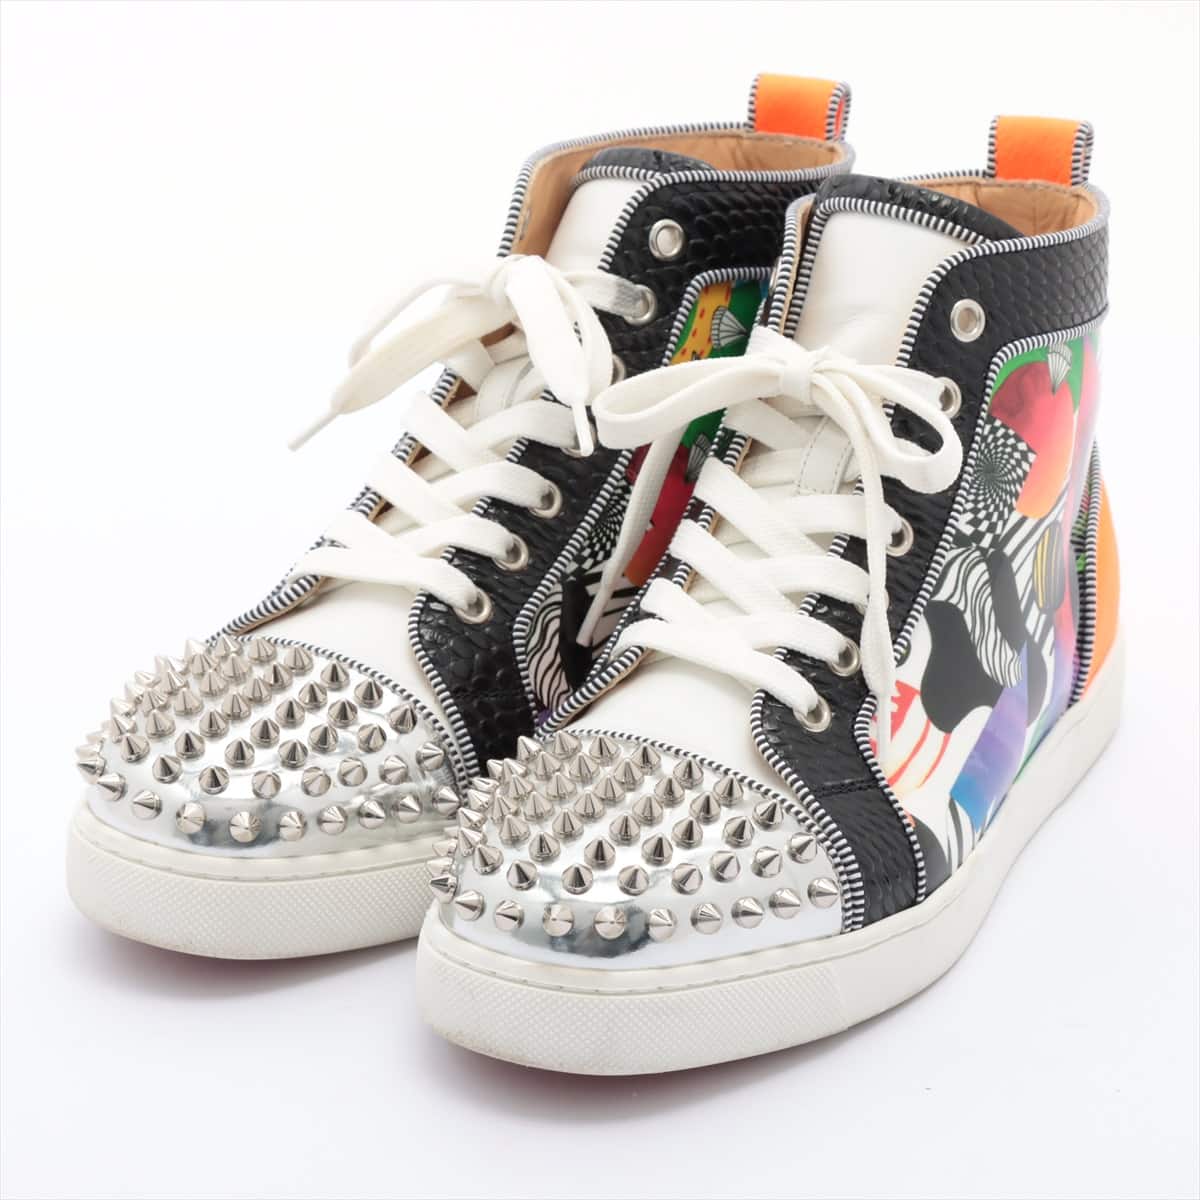 Christian Louboutin Spike Studs Leather & patent High-top Sneakers 37 Ladies' Multicolor Louis Junior Spikes Orlato Print